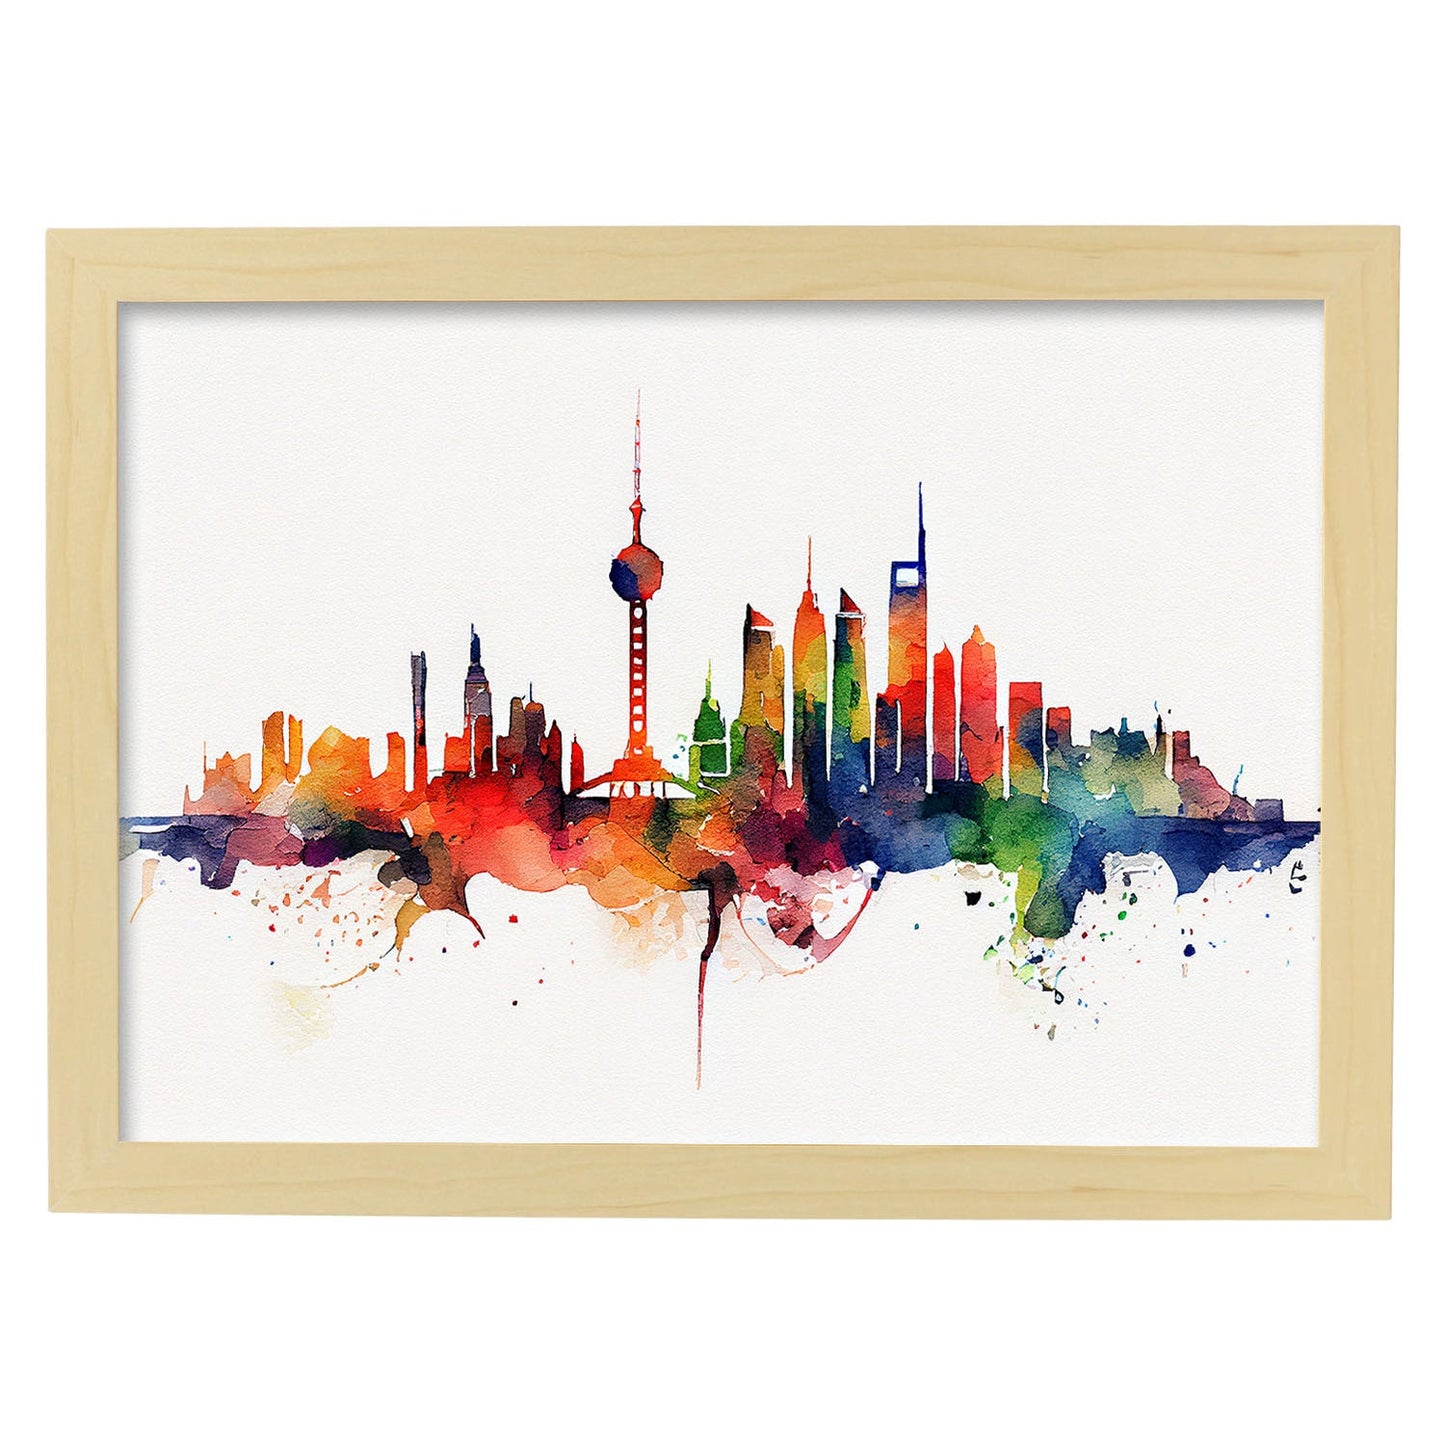 Nacnic watercolor of a skyline of the city of Shanghai_4. Aesthetic Wall Art Prints for Bedroom or Living Room Design.-Artwork-Nacnic-A4-Marco Madera Clara-Nacnic Estudio SL